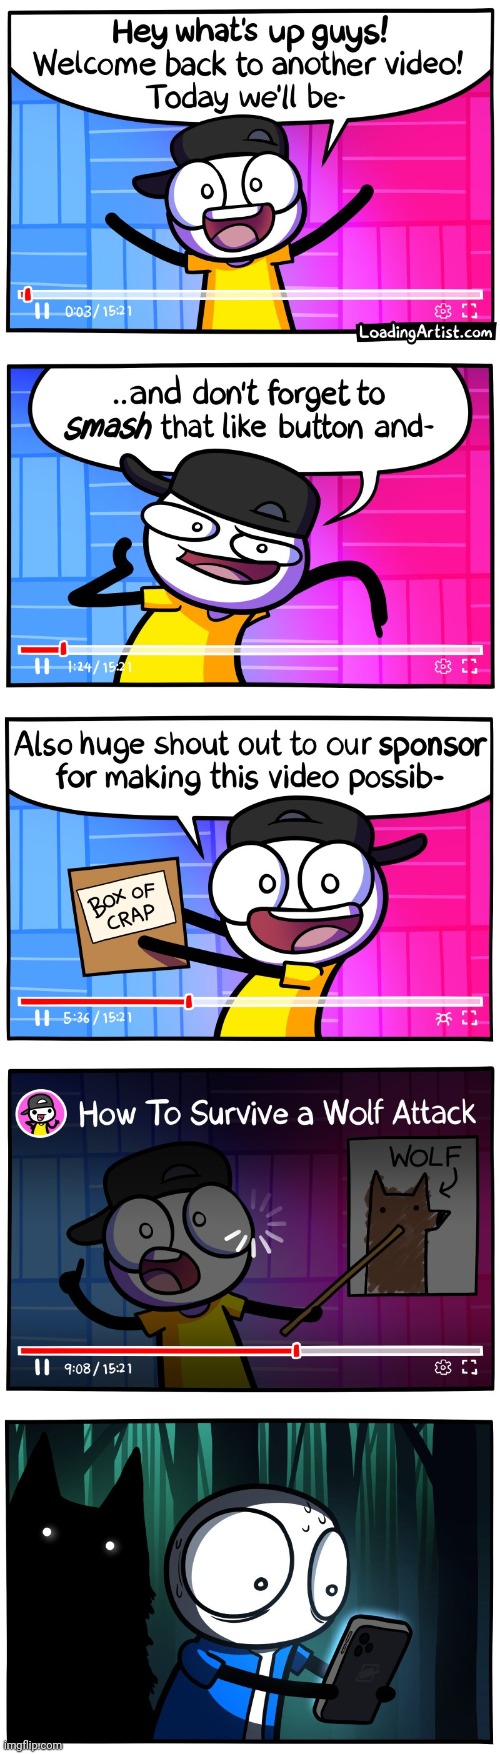 #3,055 | image tagged in comics/cartoons,comics,loading,artist,videos,wolves | made w/ Imgflip meme maker